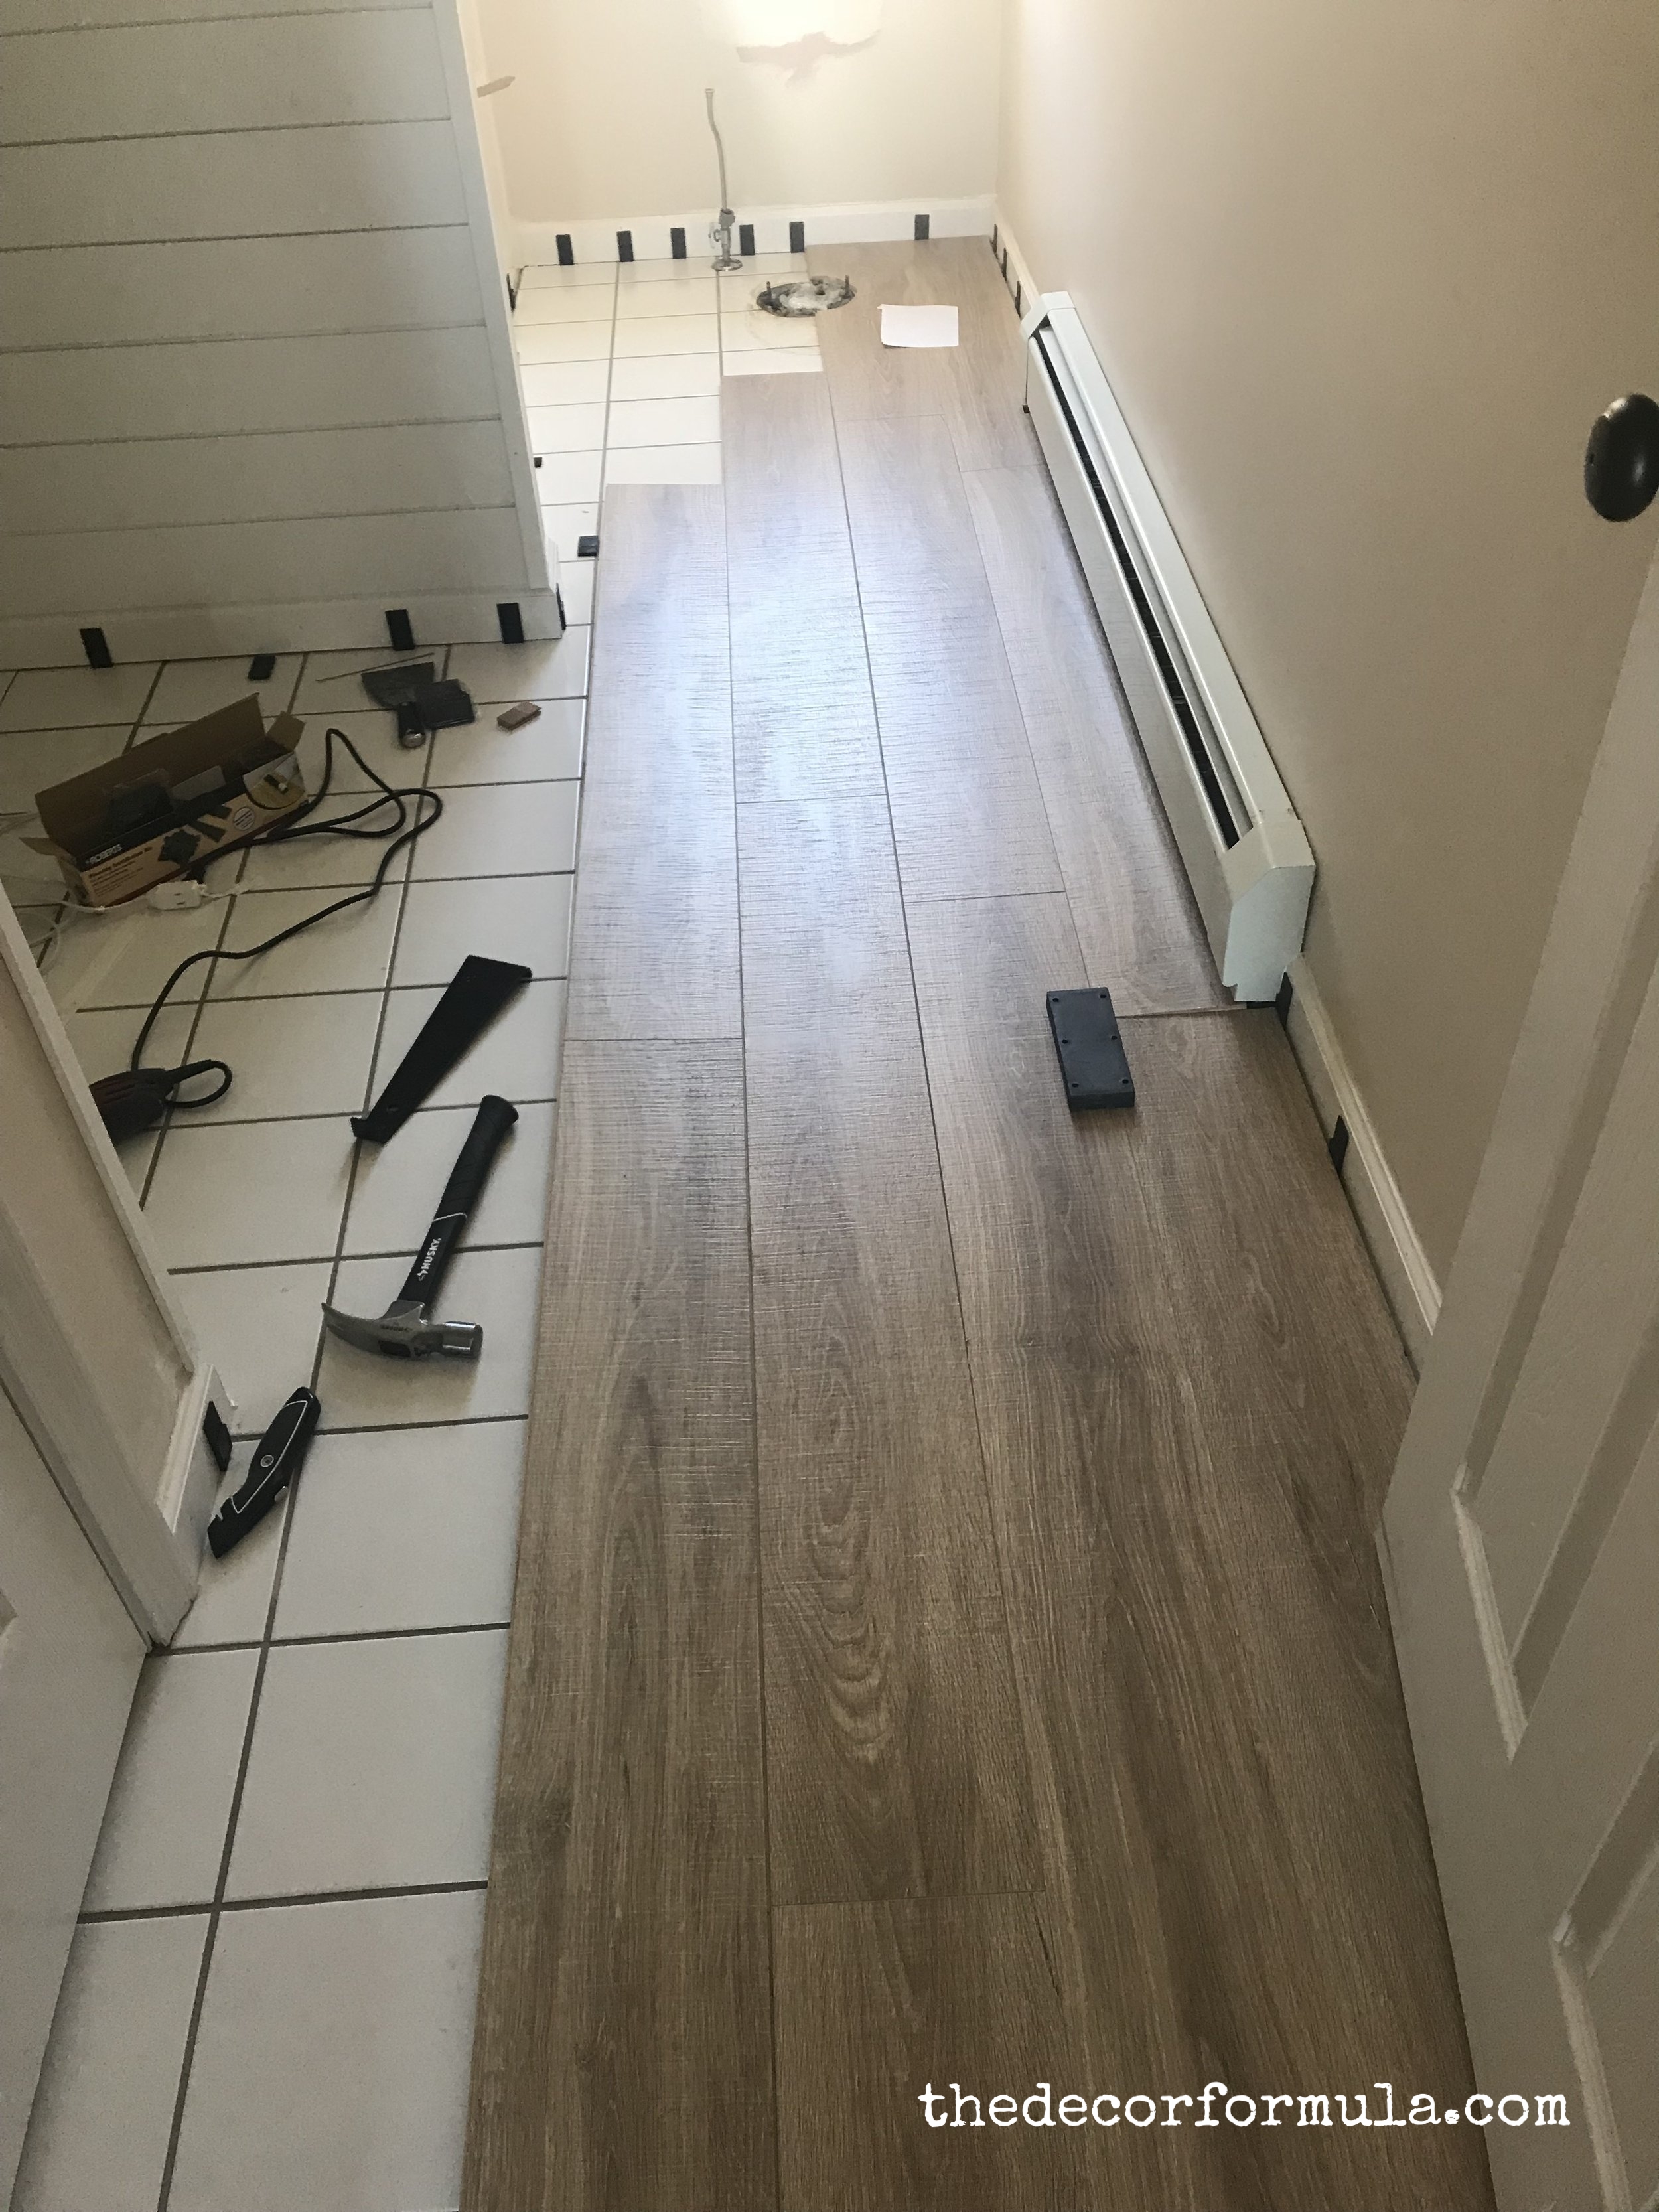 Ideas For Covering Up Tile Floors, How To Change Kitchen Floor Tile Color Without Replacing